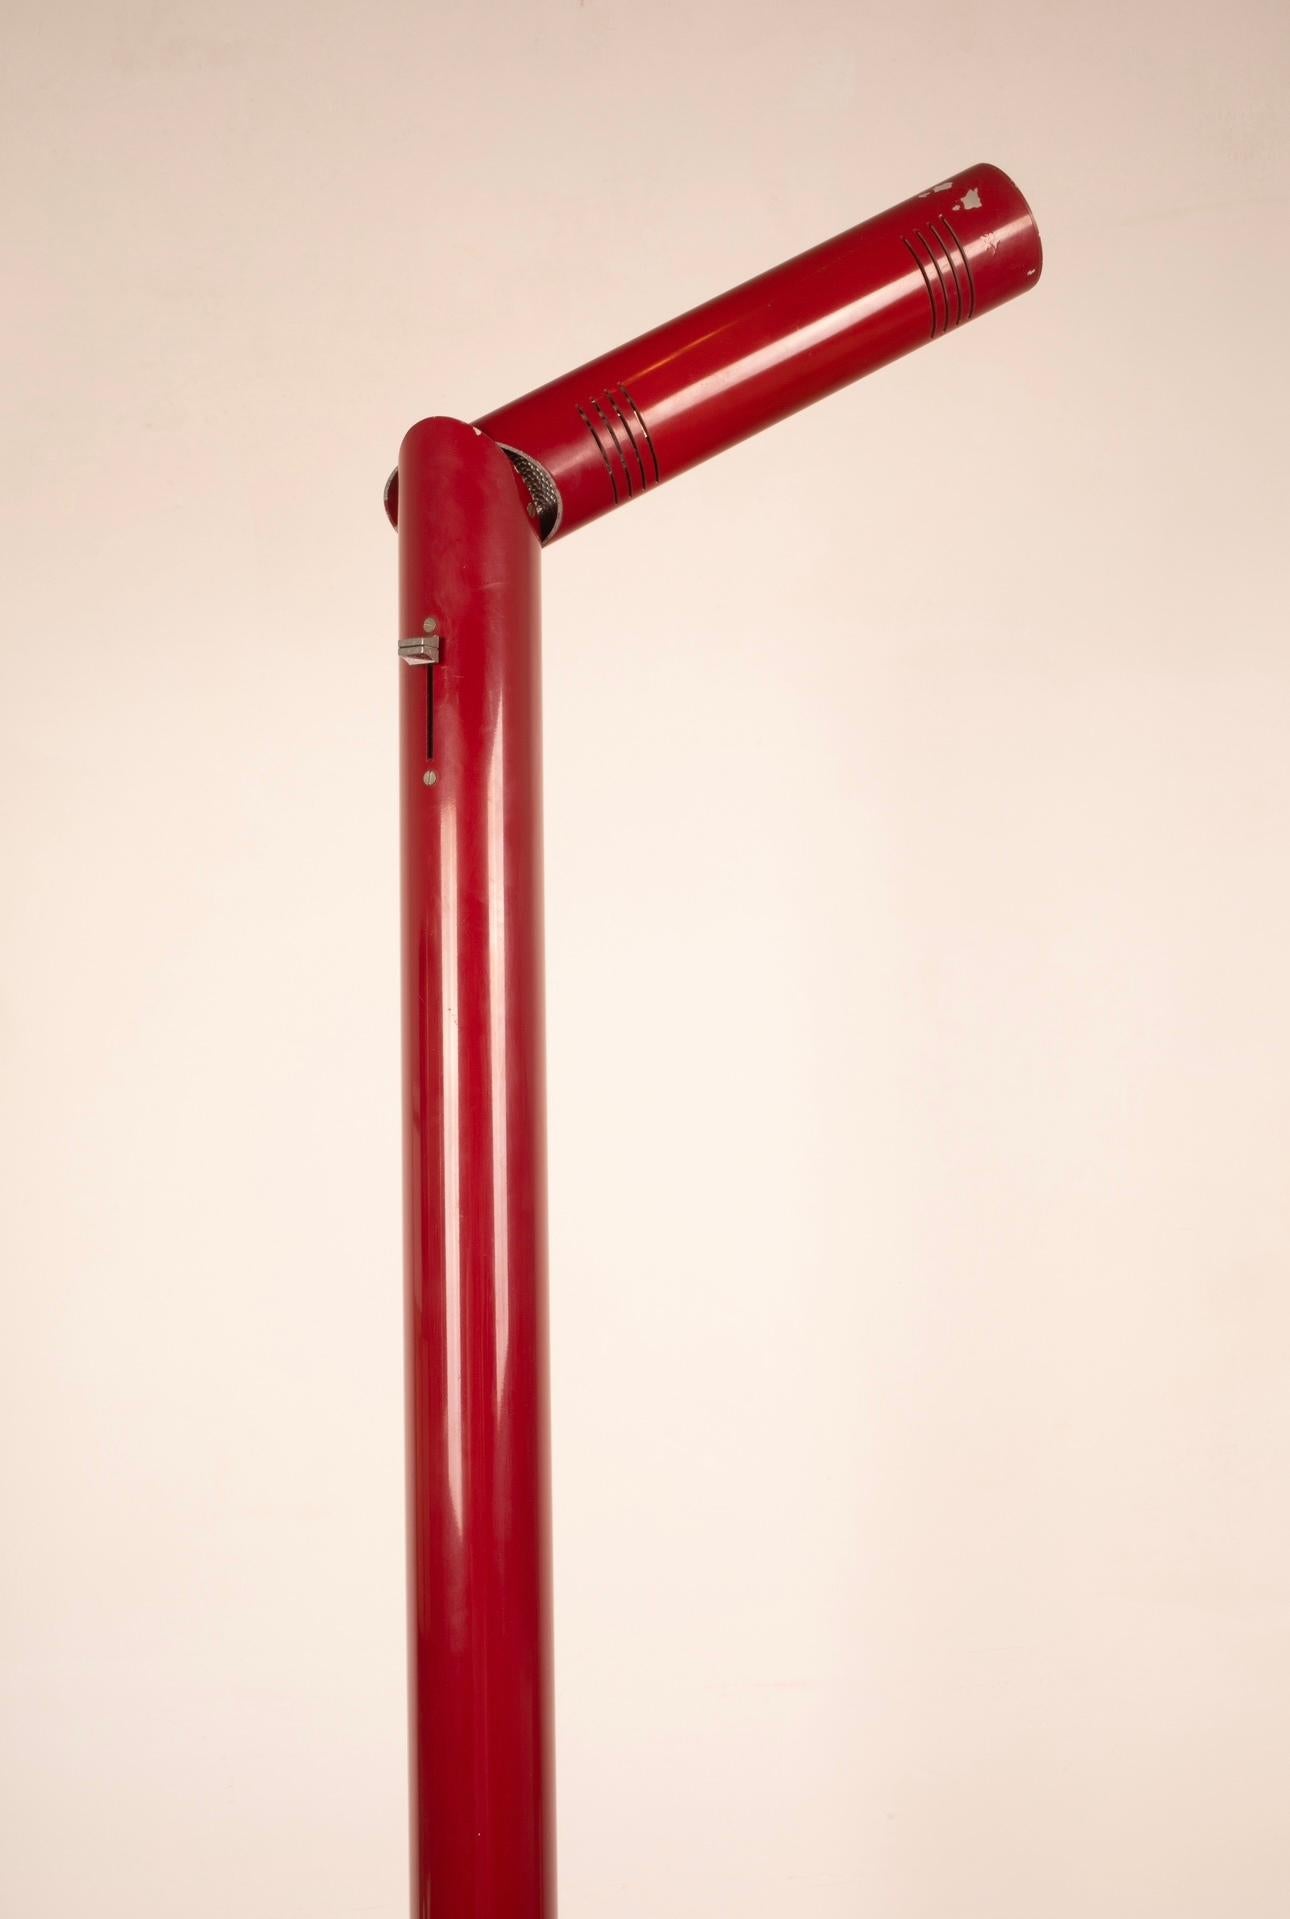 Extraordinary and rare floor lamp produced by Reggiani and designed by Nanda Vigo in the late 1970s, belonging to the wonderful Geometral series.
The floor lamp consists of a circular red enameled iron pole 187cm high to 212cm high, with the top